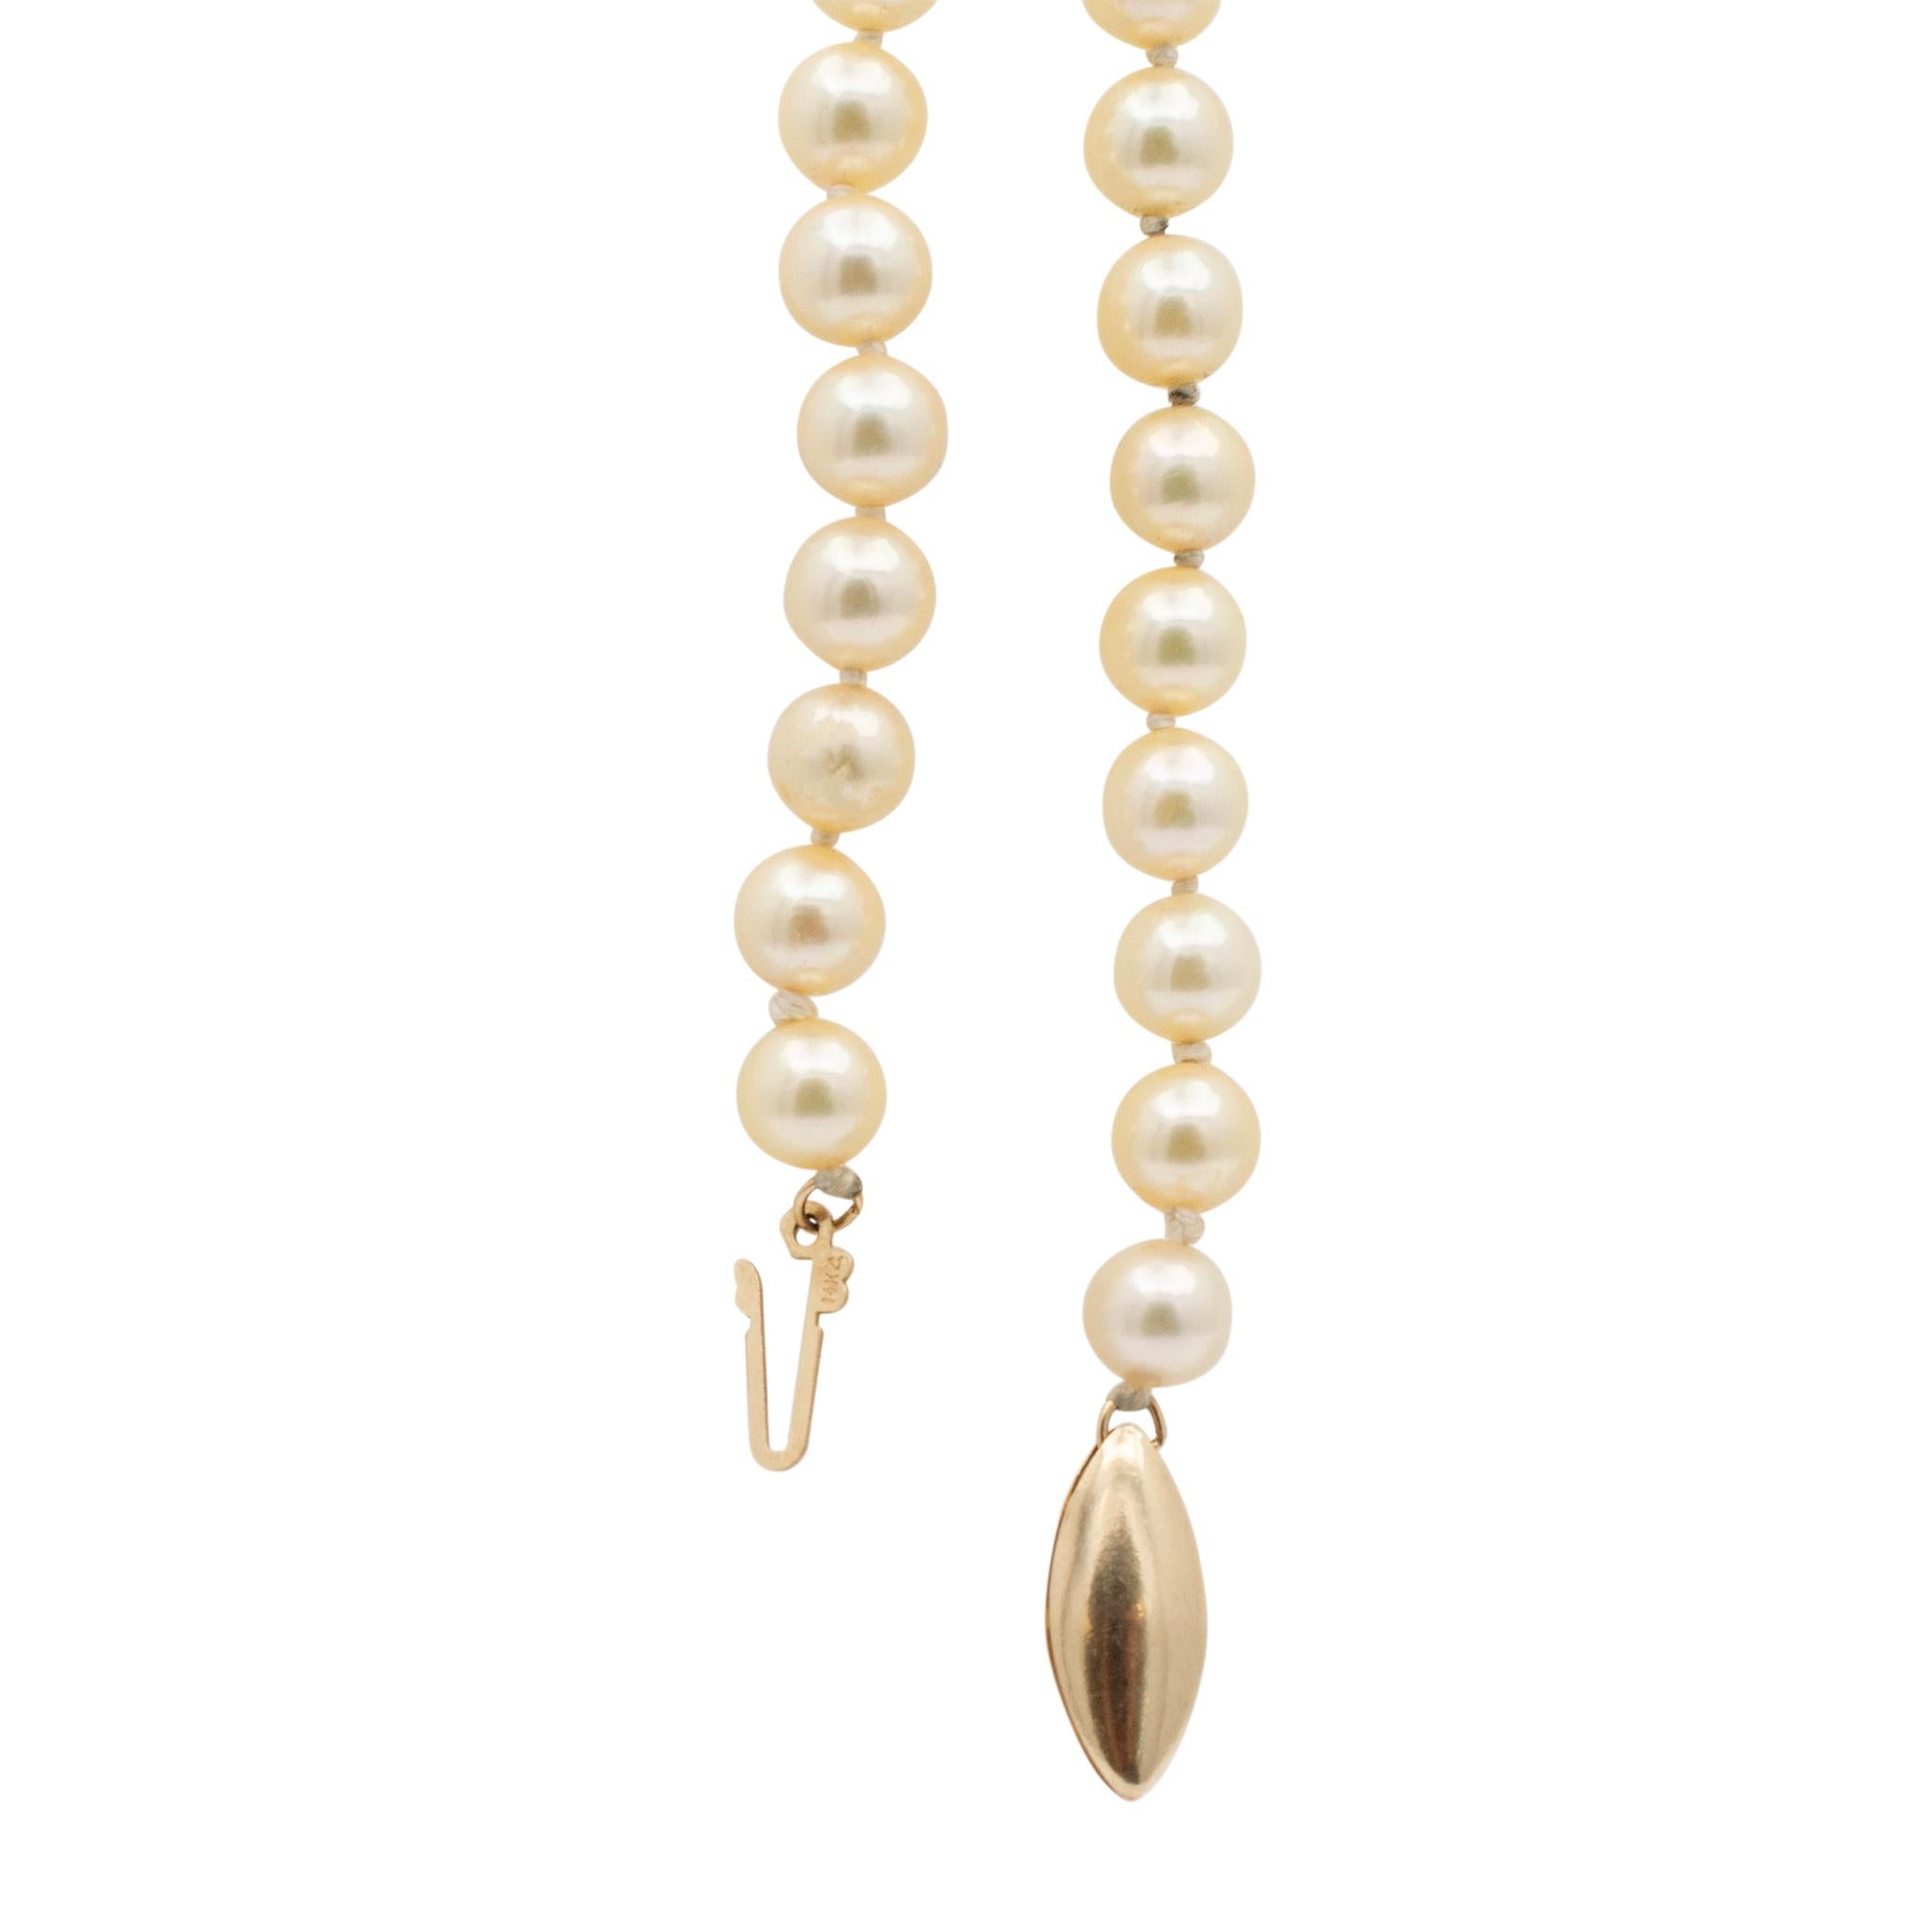 Women's Ladies Vintage Natural Pearl Beads Cocktail Chain Necklace With 14K Yellow Gold For Sale